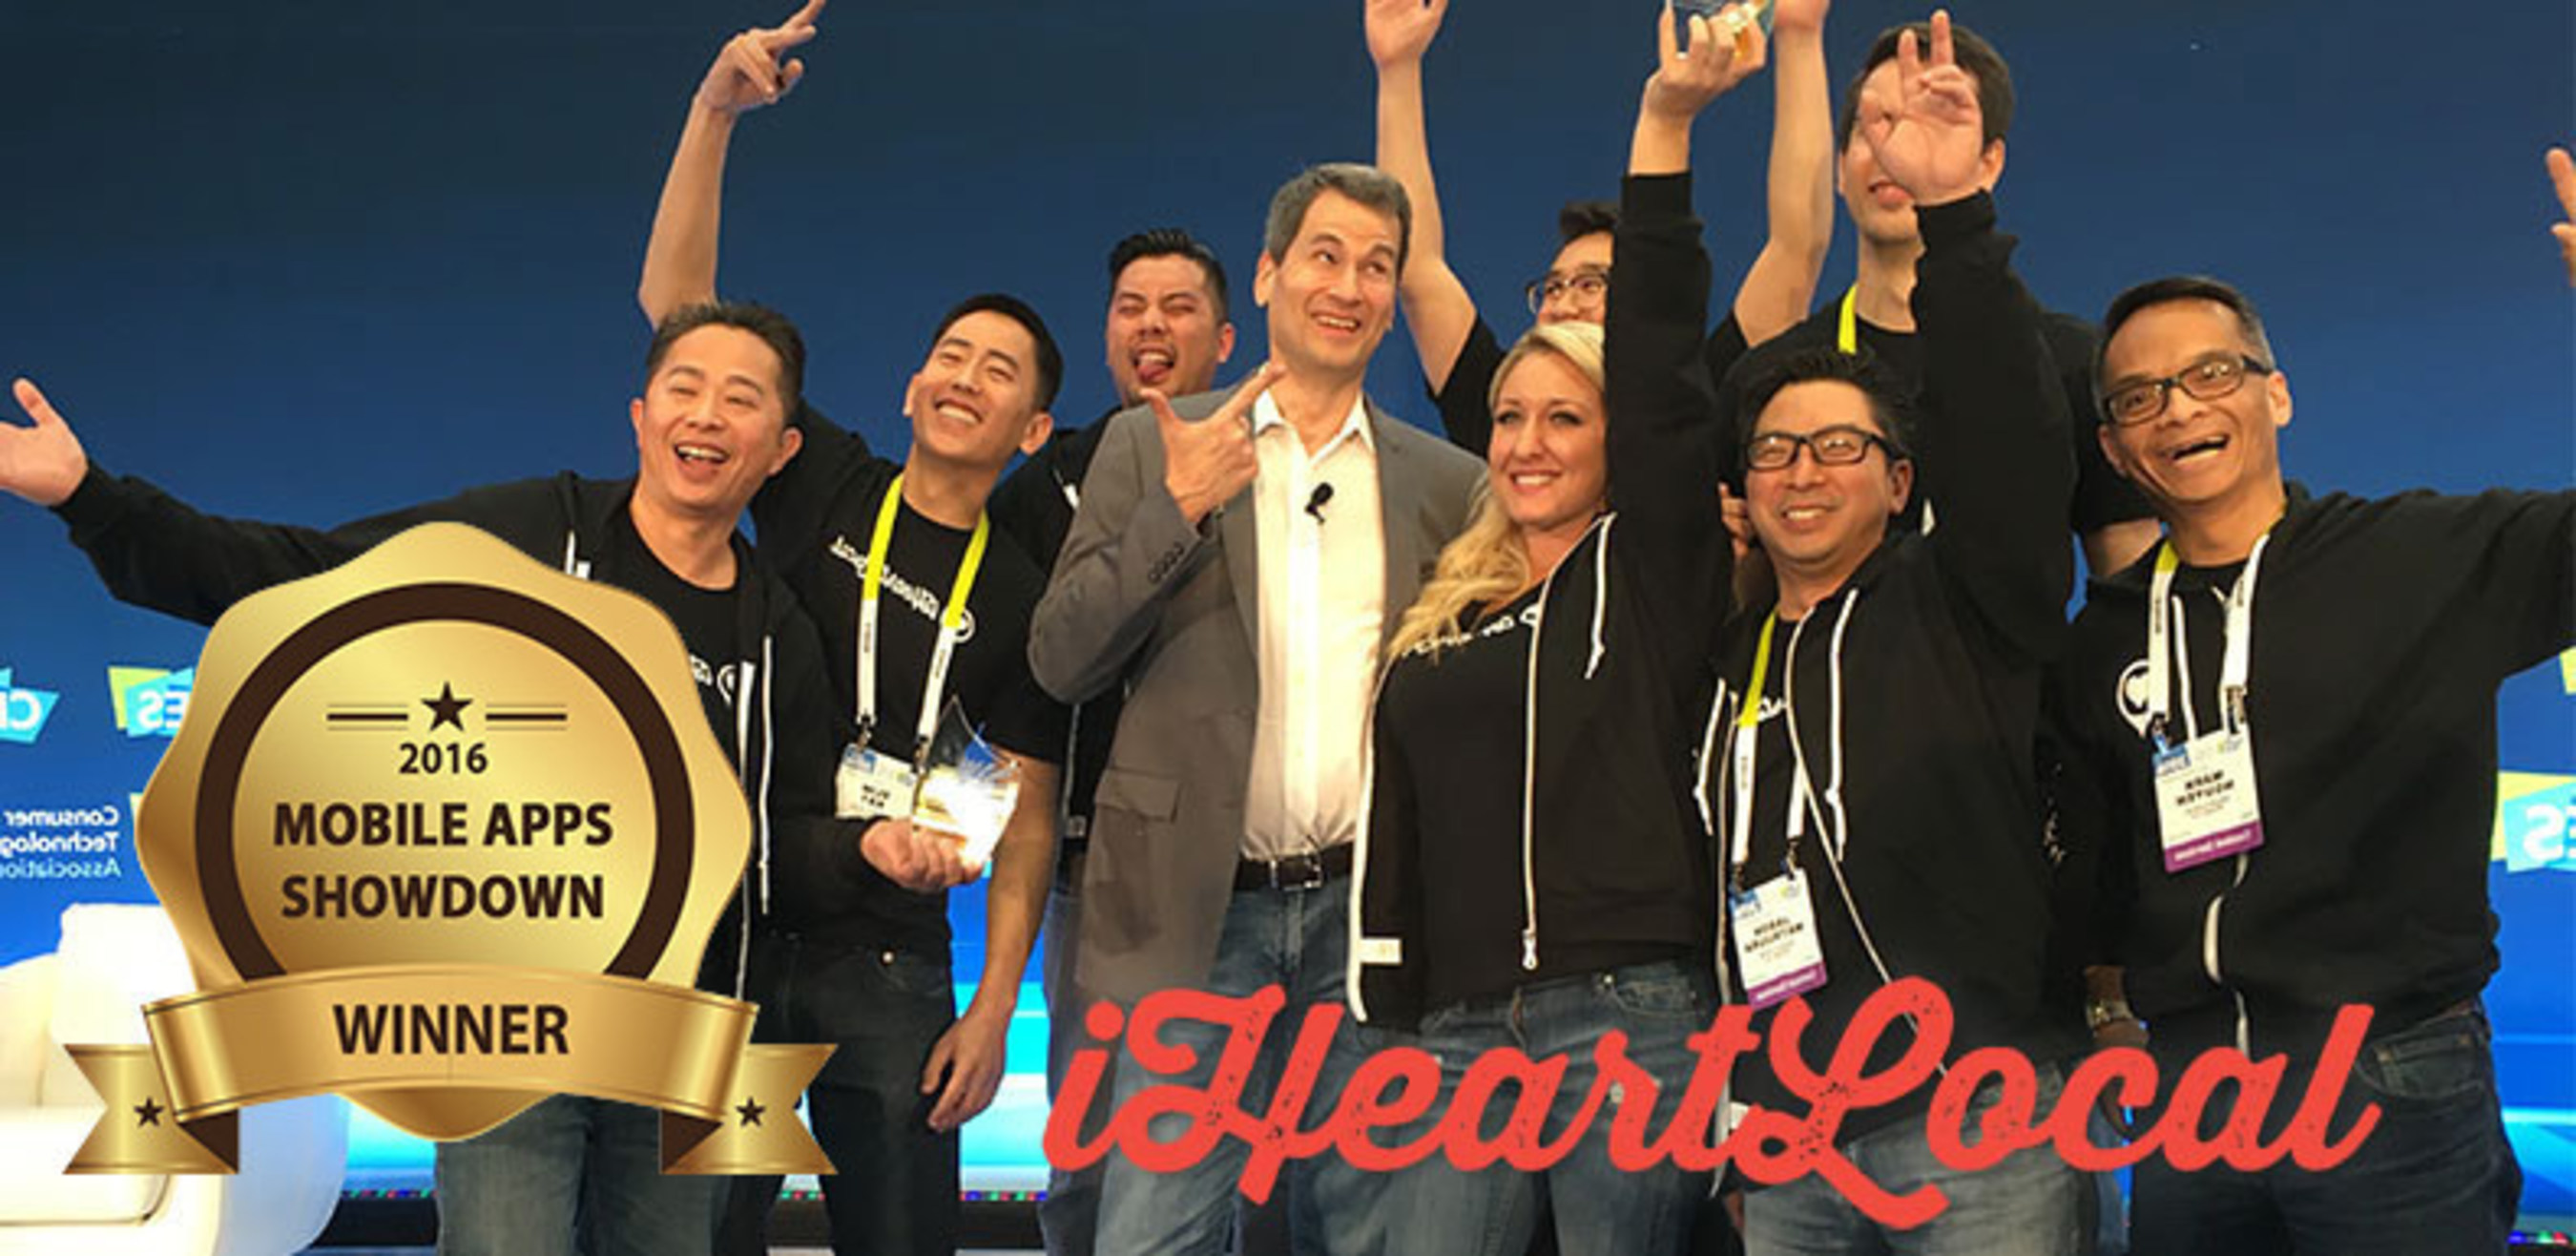 Representatives with iHeartLocal pictured with Yahoo! Tech founder and event emcee David Pogue, celebrate after being named the Mobile Apps Showdown live event and online winner at CES 2016.